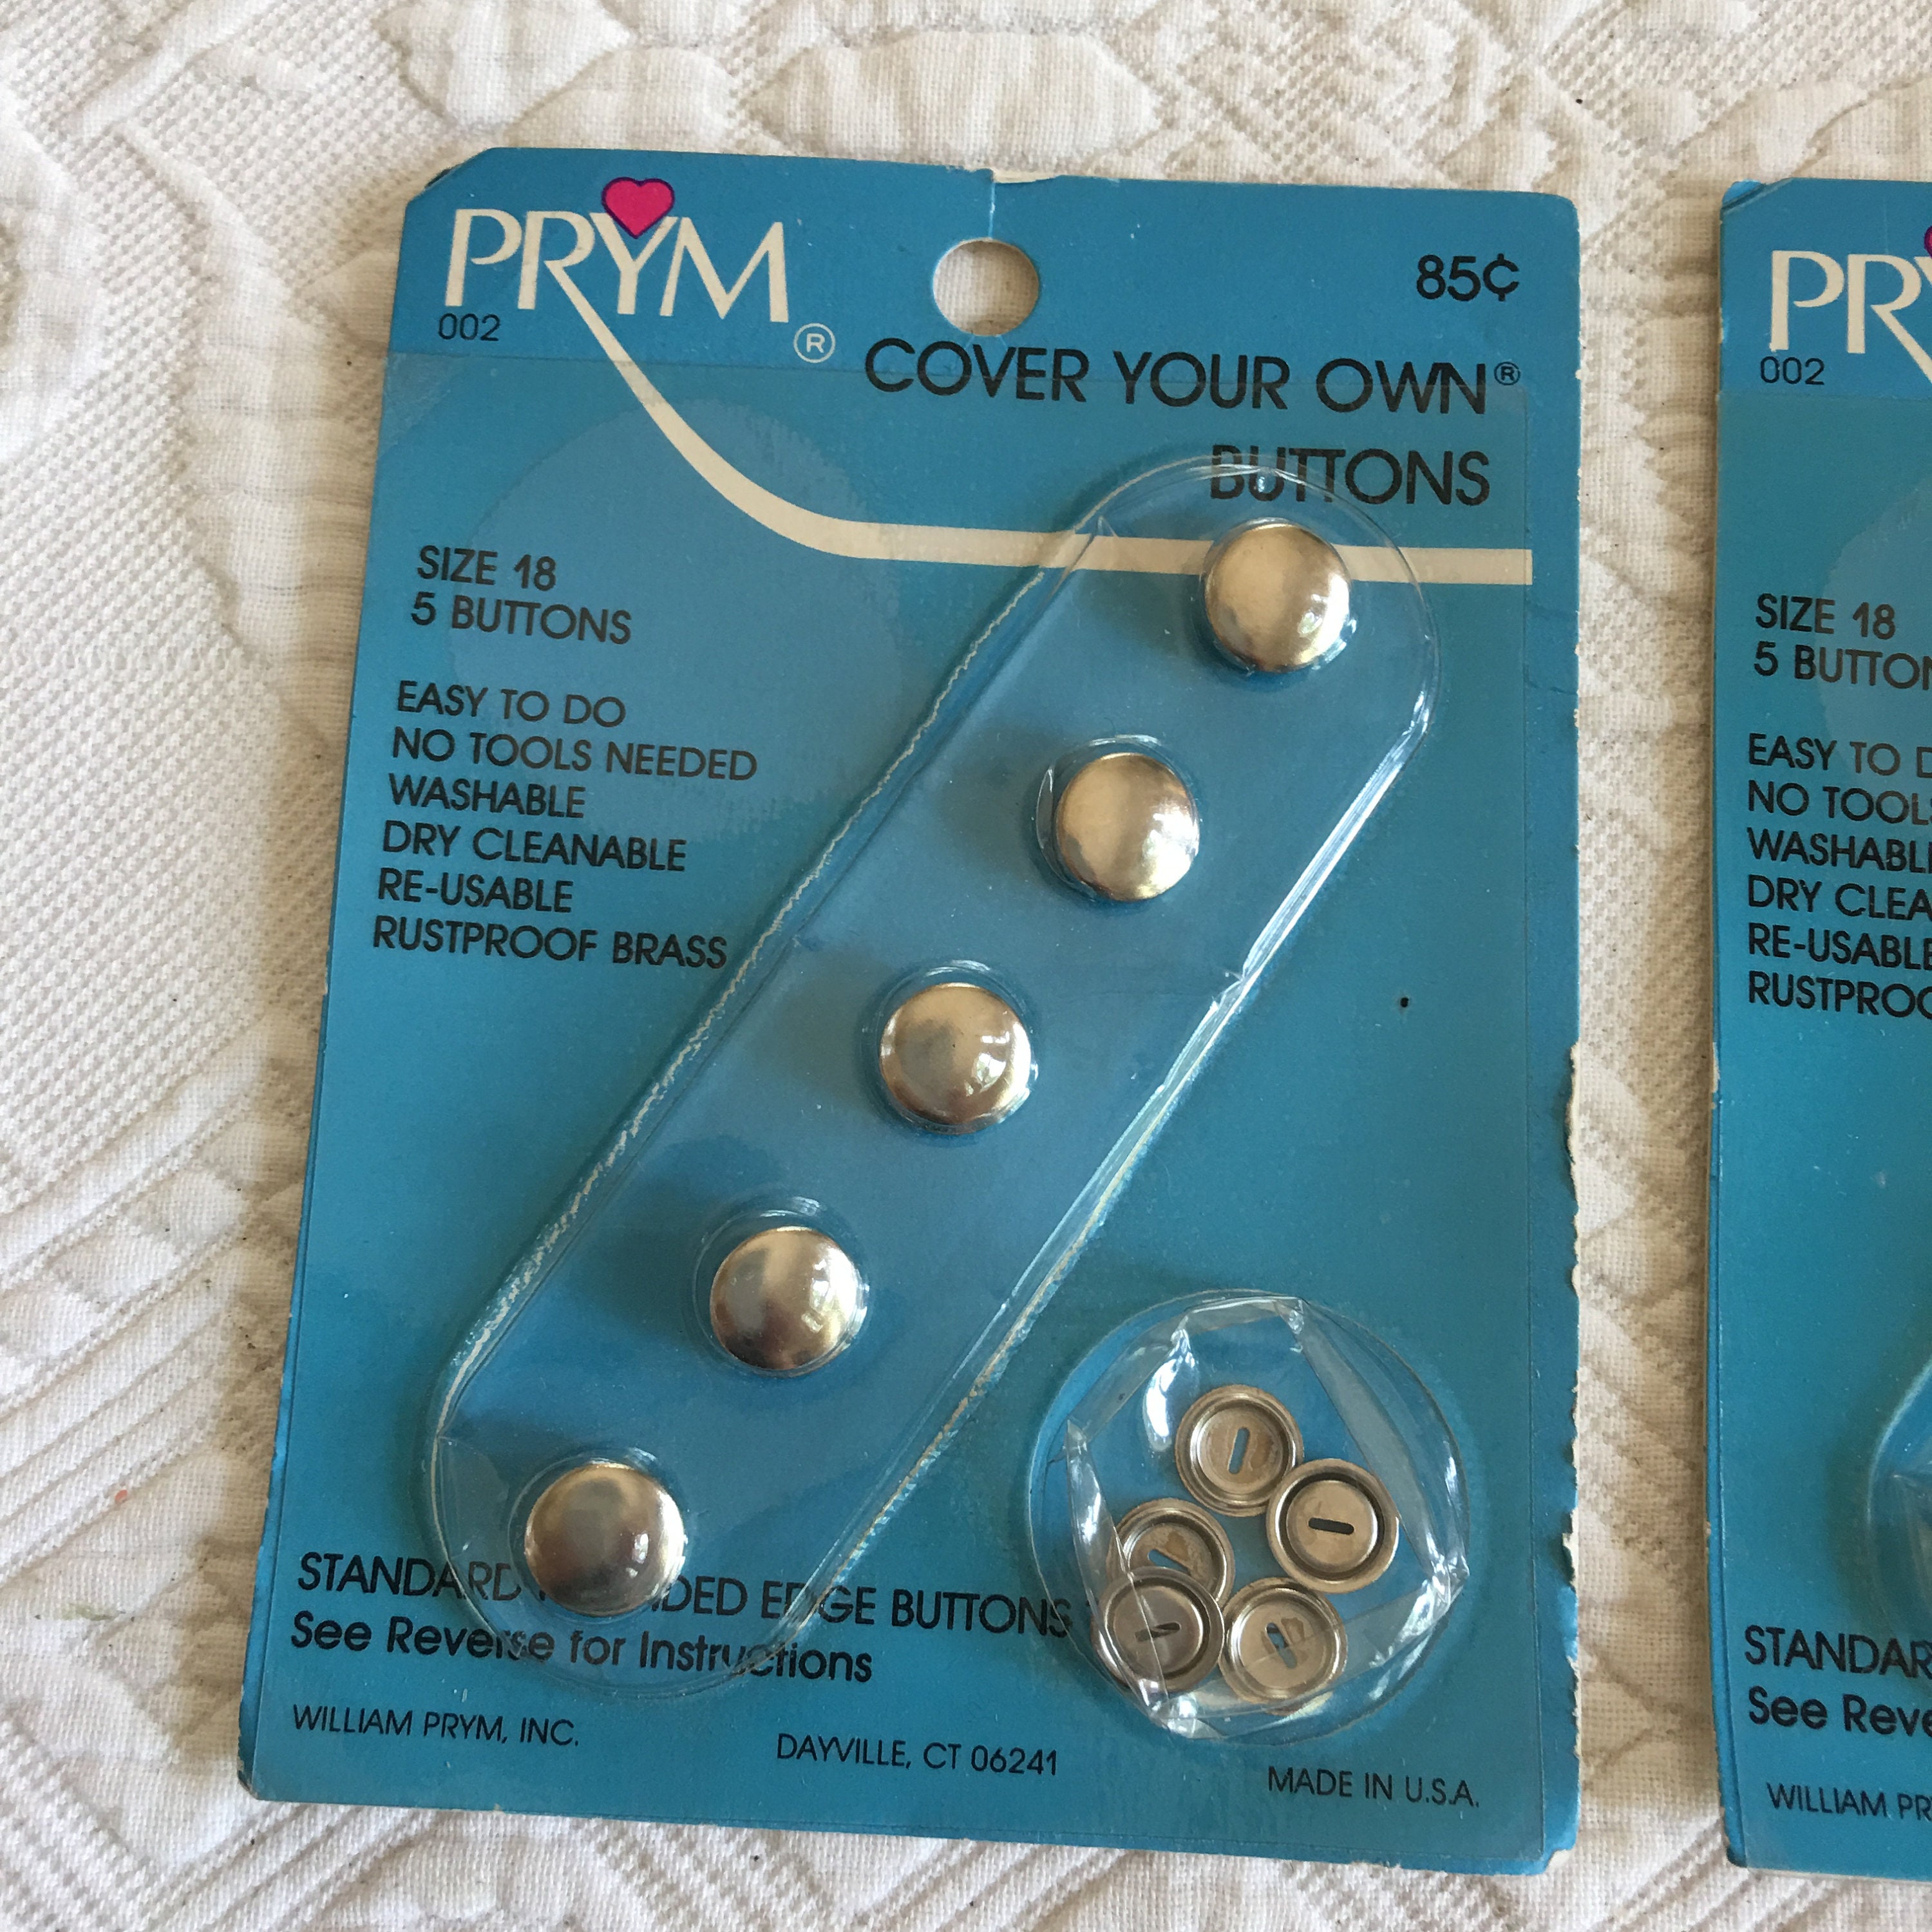 Prym 673170 Pull Universal Tool for Cover Buttons 11-29 mm, One Size, Blue